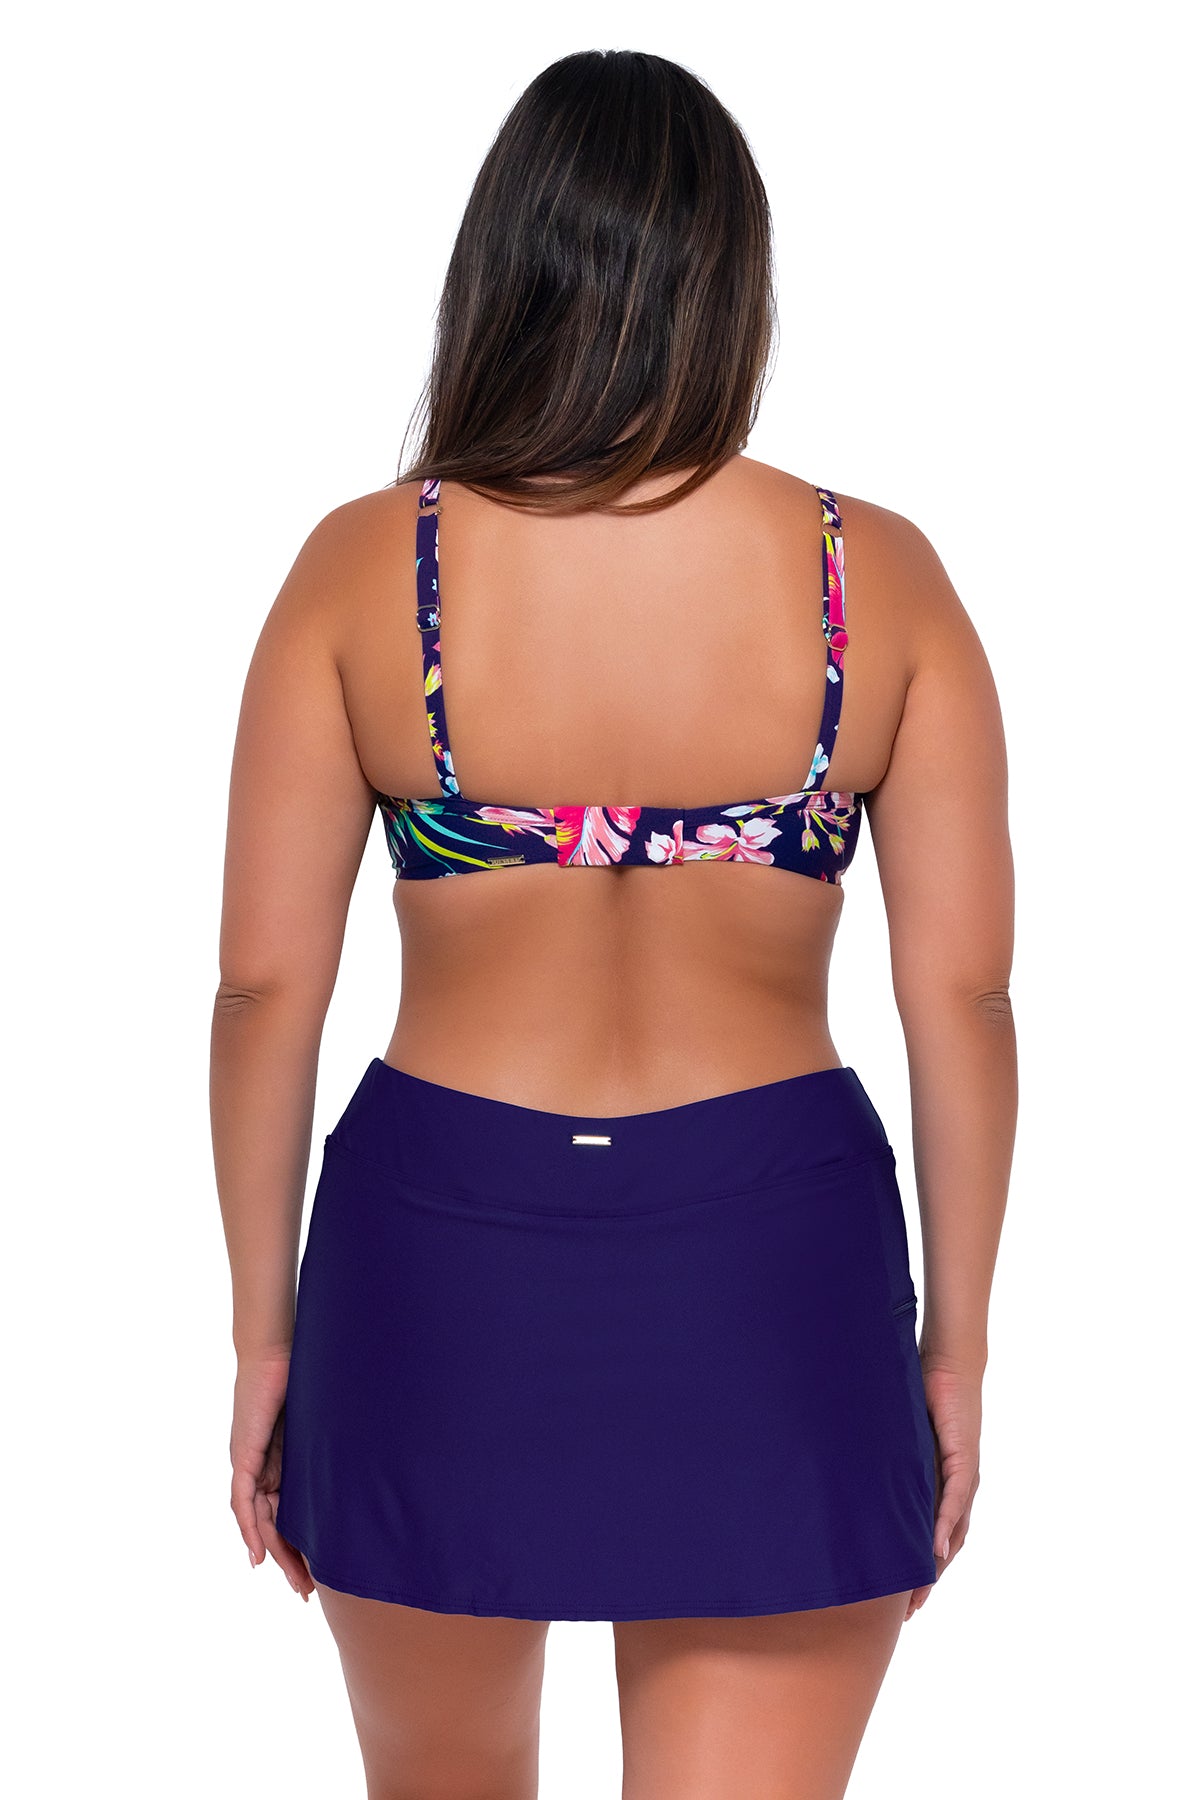 Back pose #1 of Nicky wearing Sunsets Island Getaway Crossroads Underwire Top with matching Sporty Swim Skirt